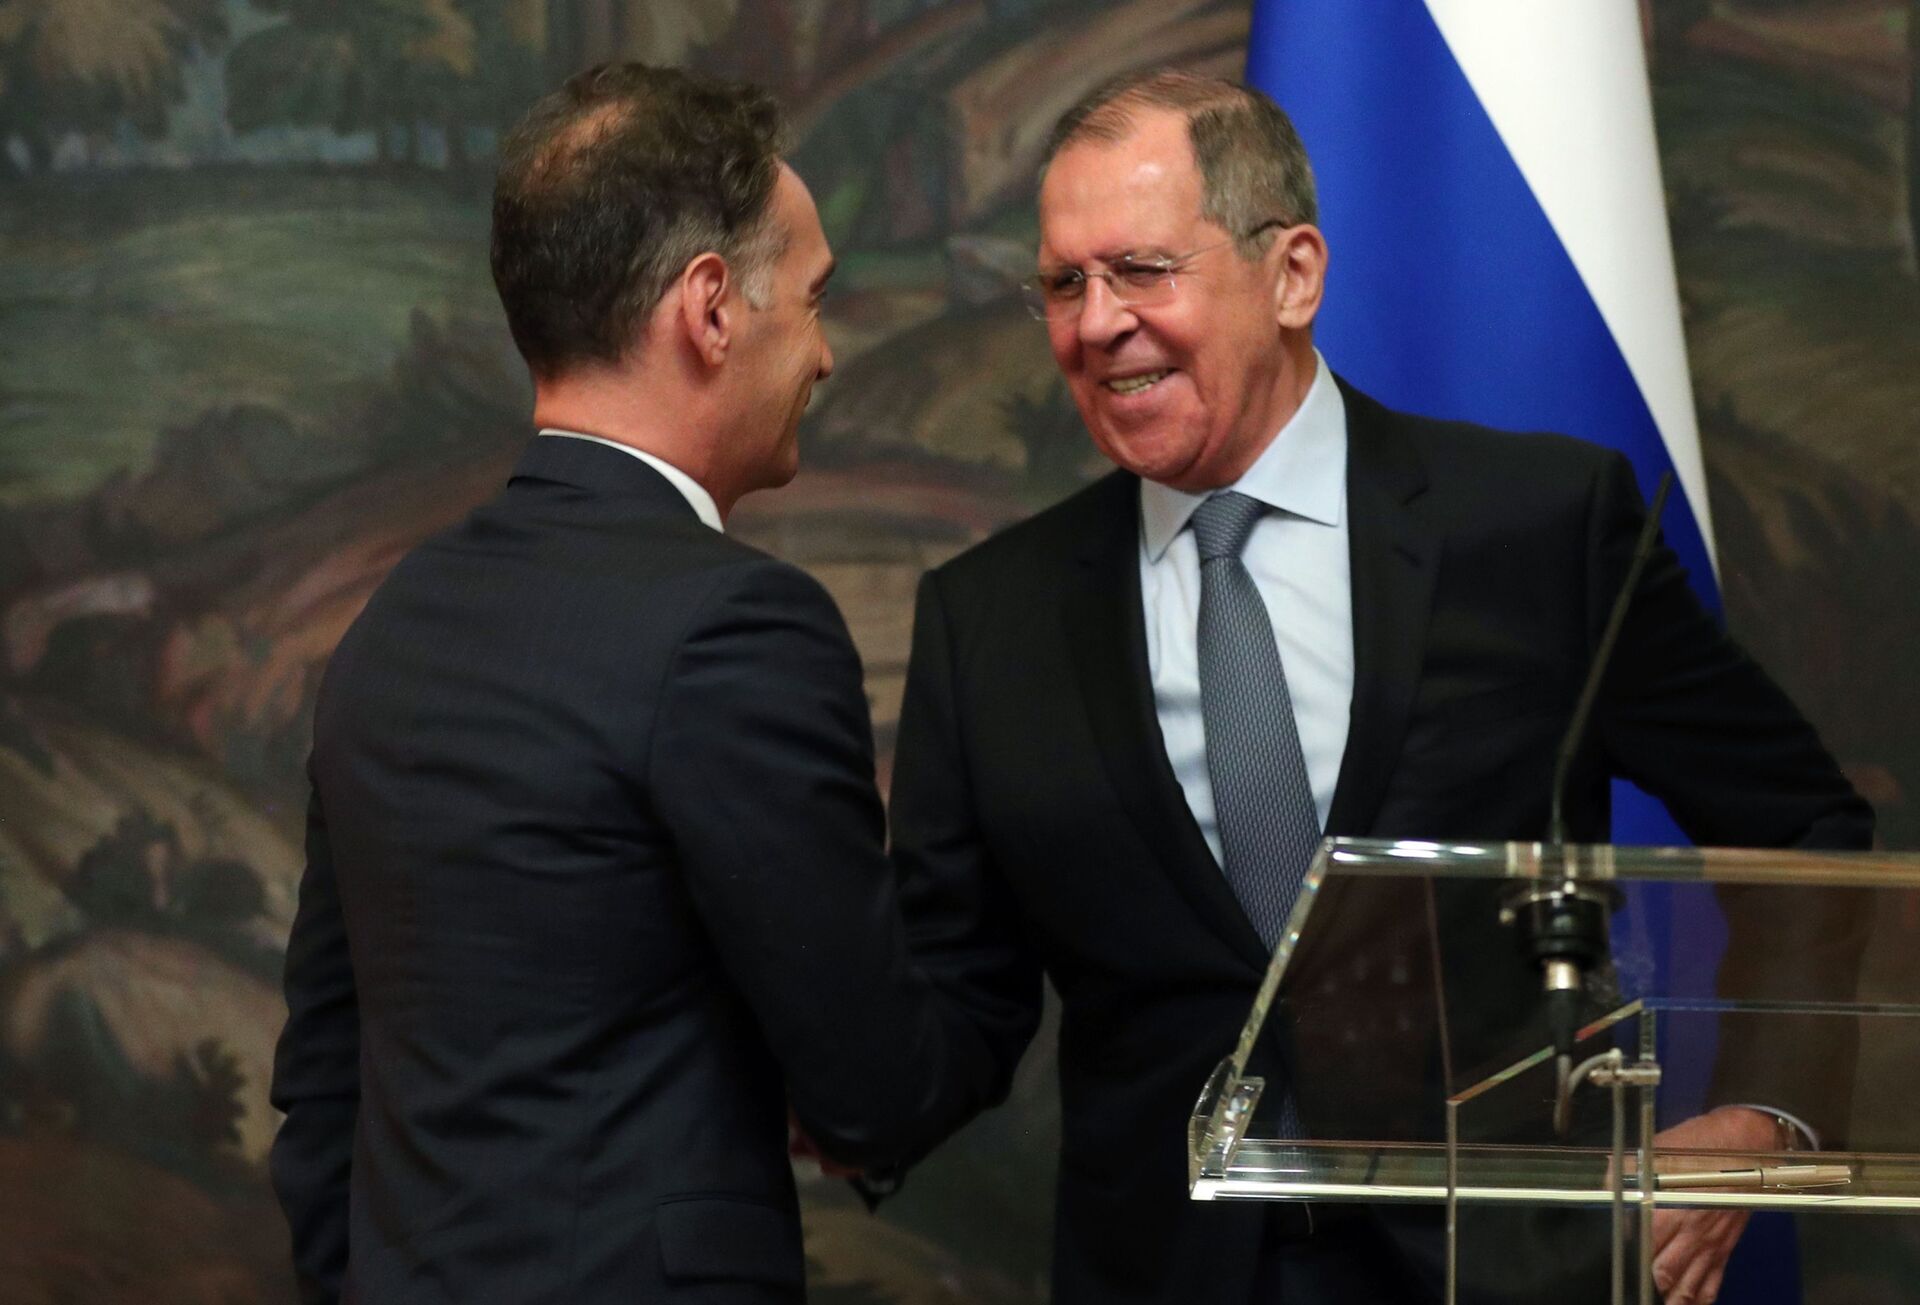 Germany Steps Up 'Russia Containment' Policy But Moscow is Ready for Dialogue, FM Lavrov Says - Sputnik International, 1920, 18.05.2021